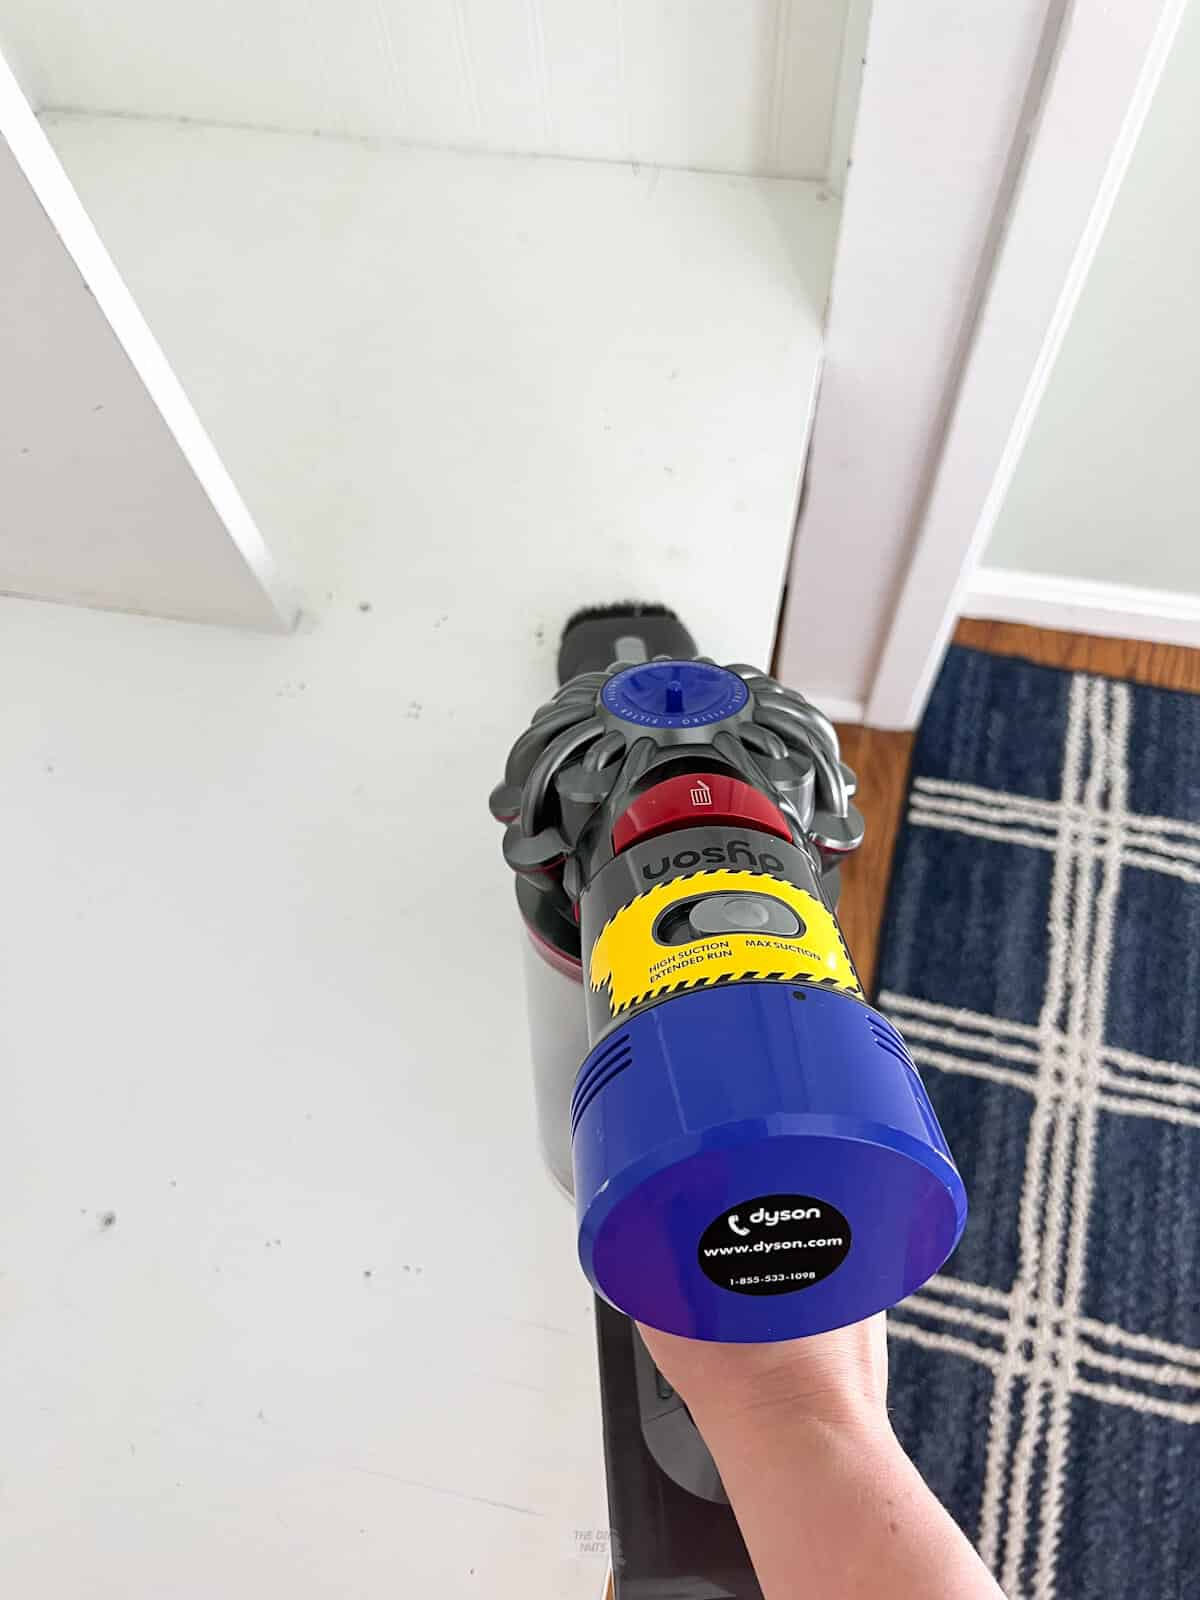 hand holding dyson vacuum cleaning wood shelves.